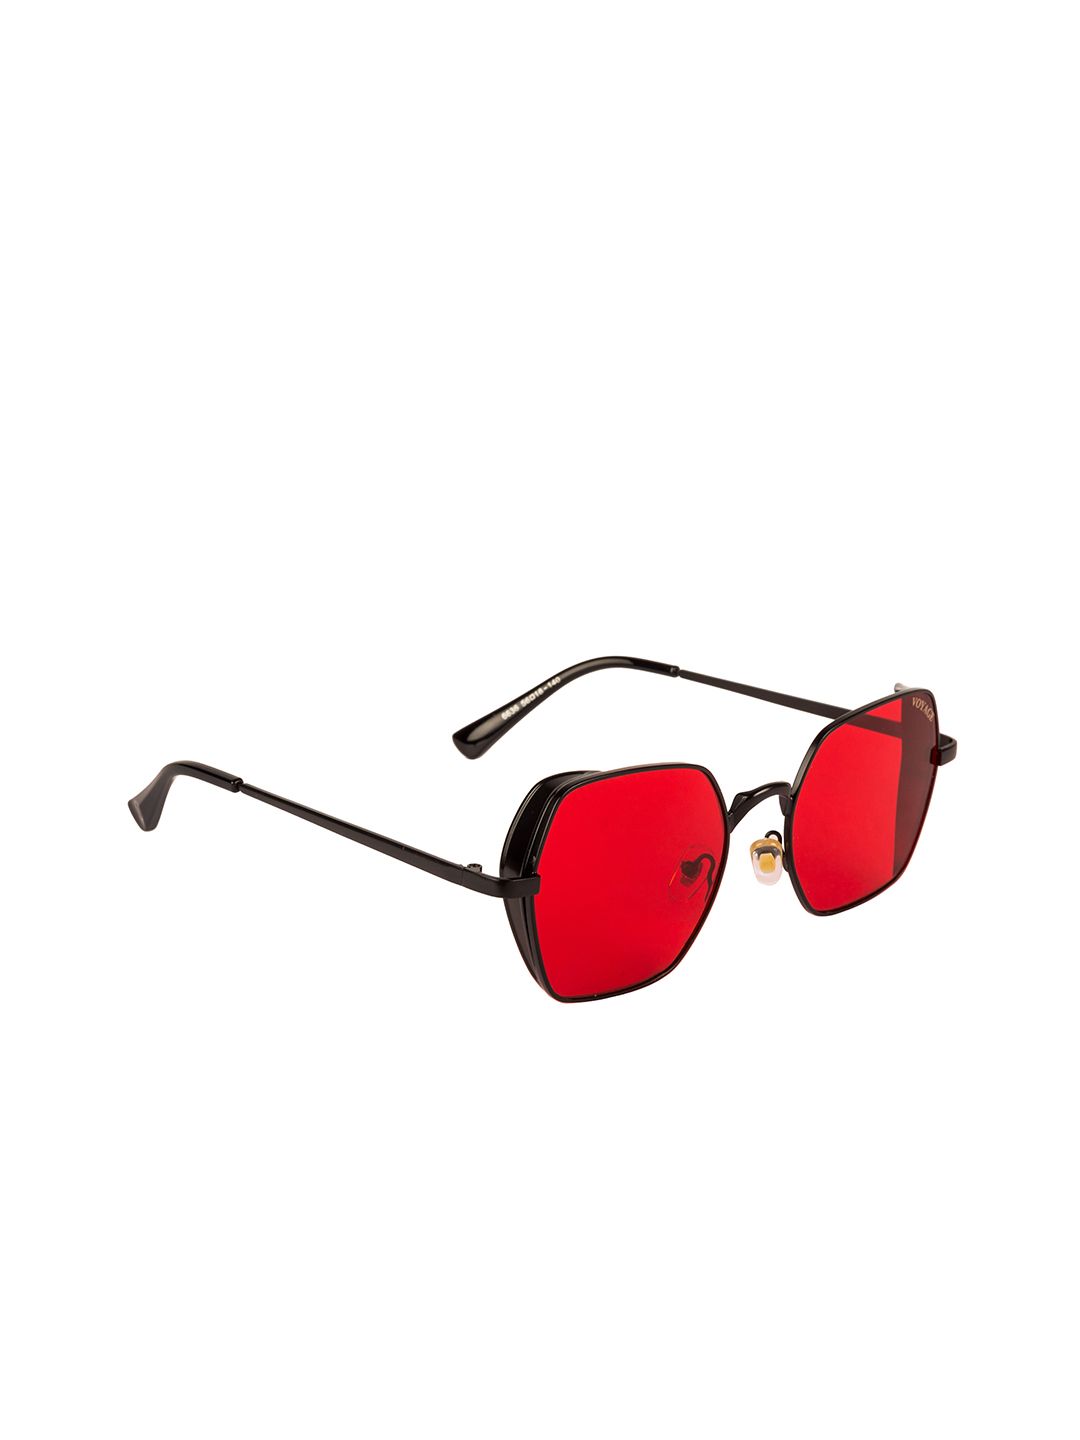 Voyage Red Lens & Black Square Sunglasses with UV Protected Lens Price in India